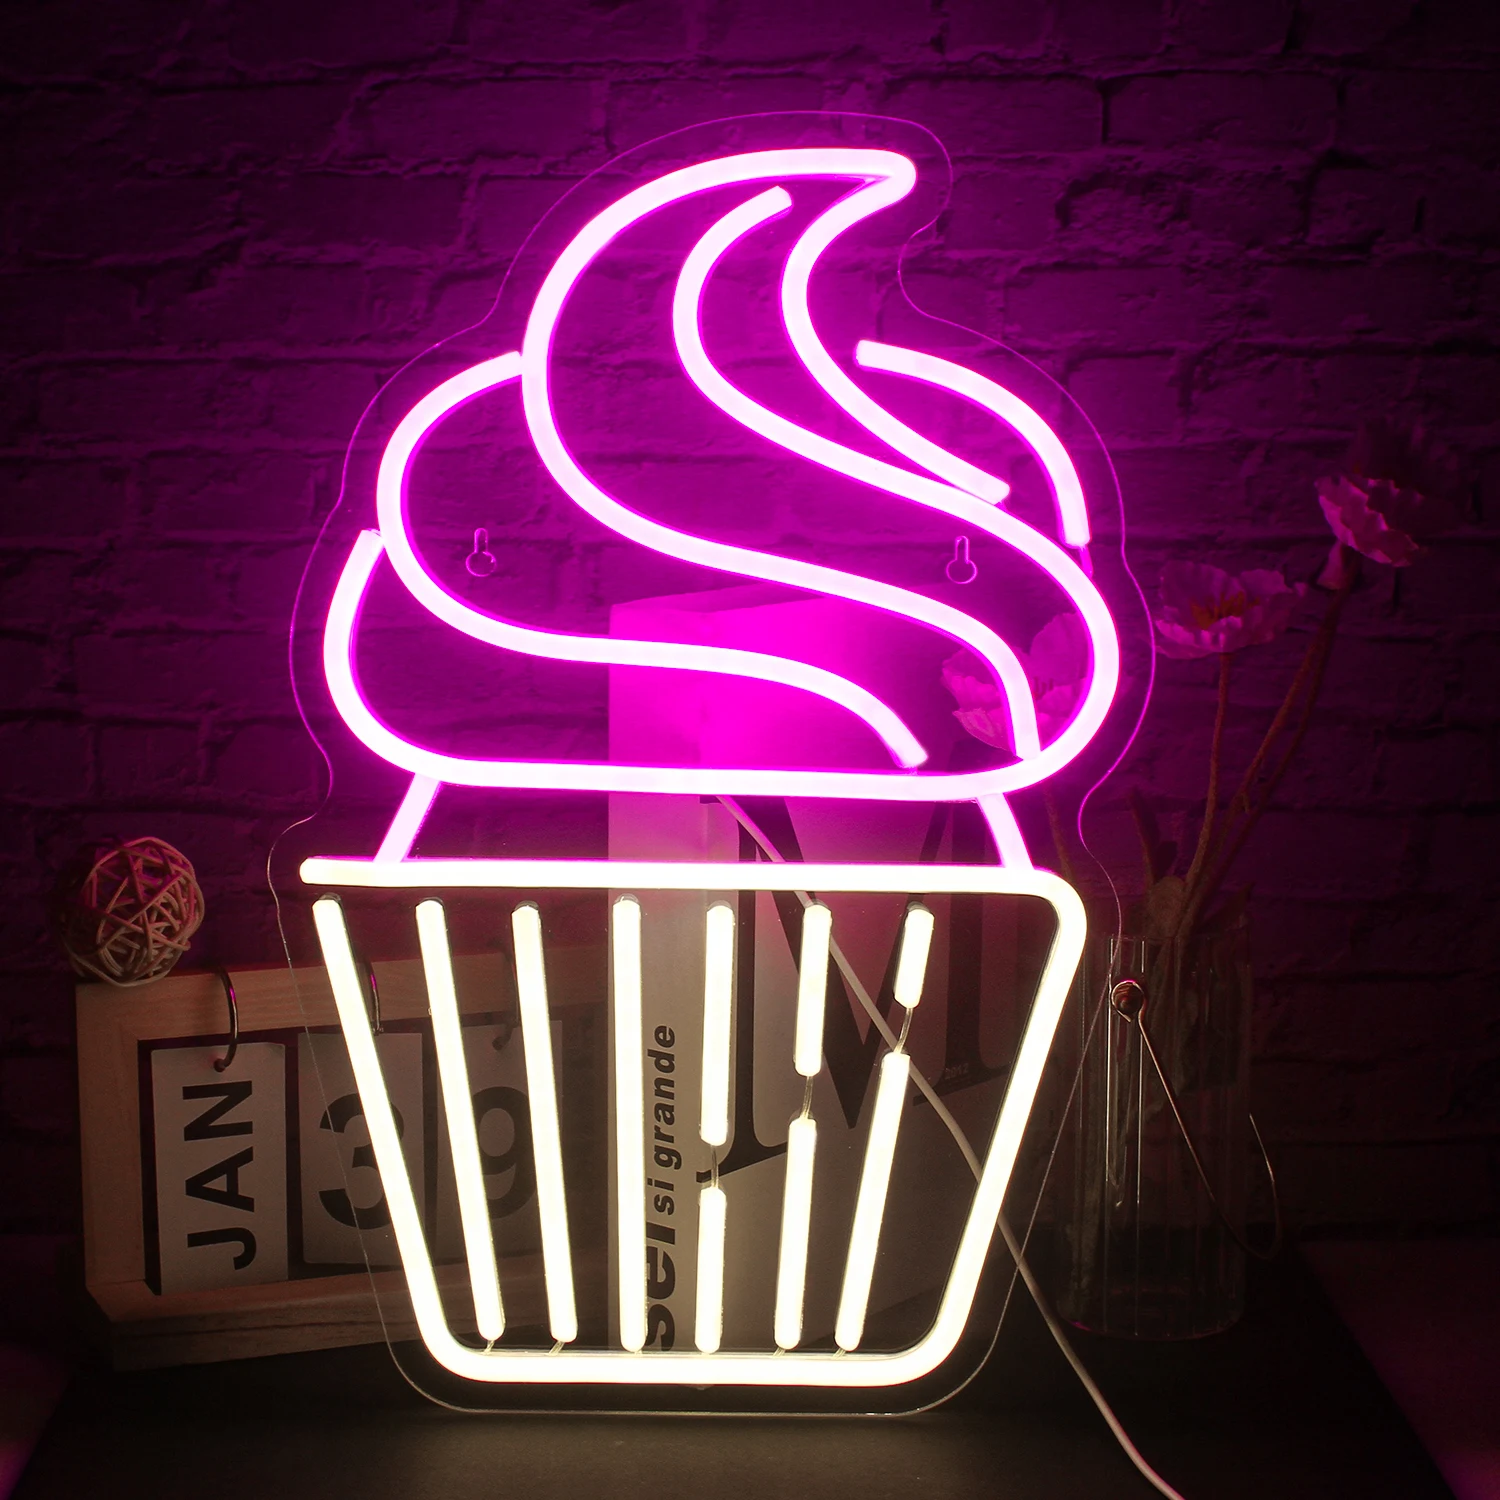 Cake ice cream Neon Sign Acrylic Backer With LED Flex Neon Dessert Shop Cafe Home Restaurant Use Open Light Cake Wall Decoration